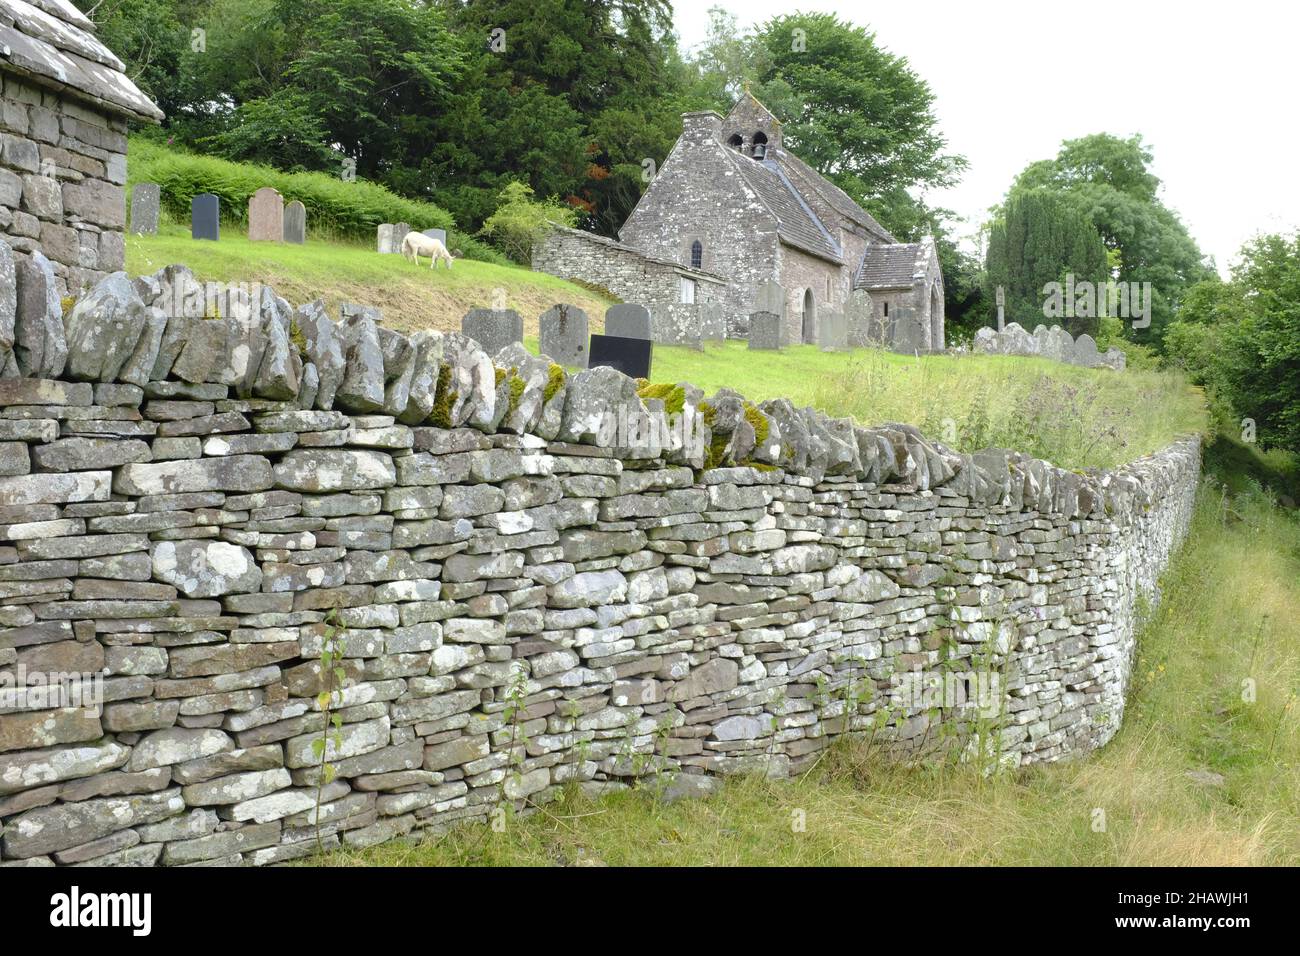 St. Issui's Church and graveyard behind a dry stone wall, Partrishow, Powys, Wales Stock Photo